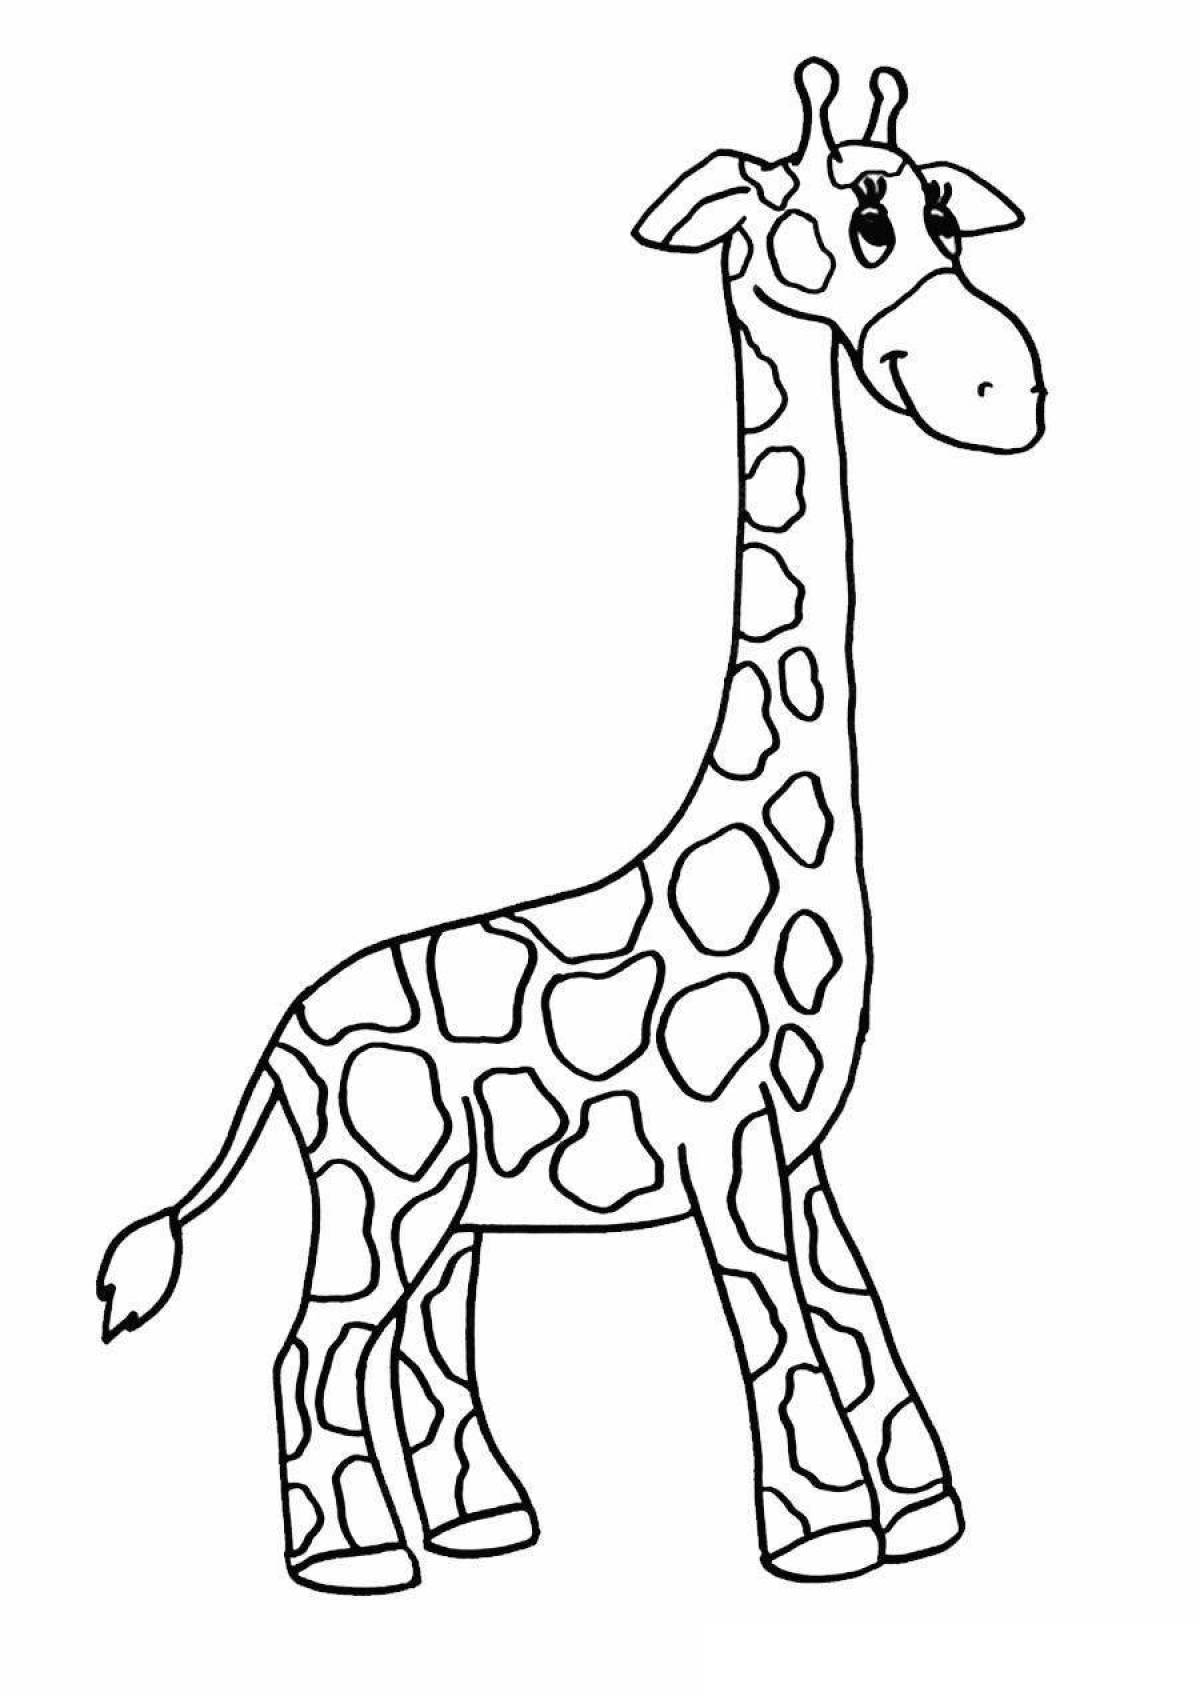 Adorable giraffe coloring book for 3-4 year olds